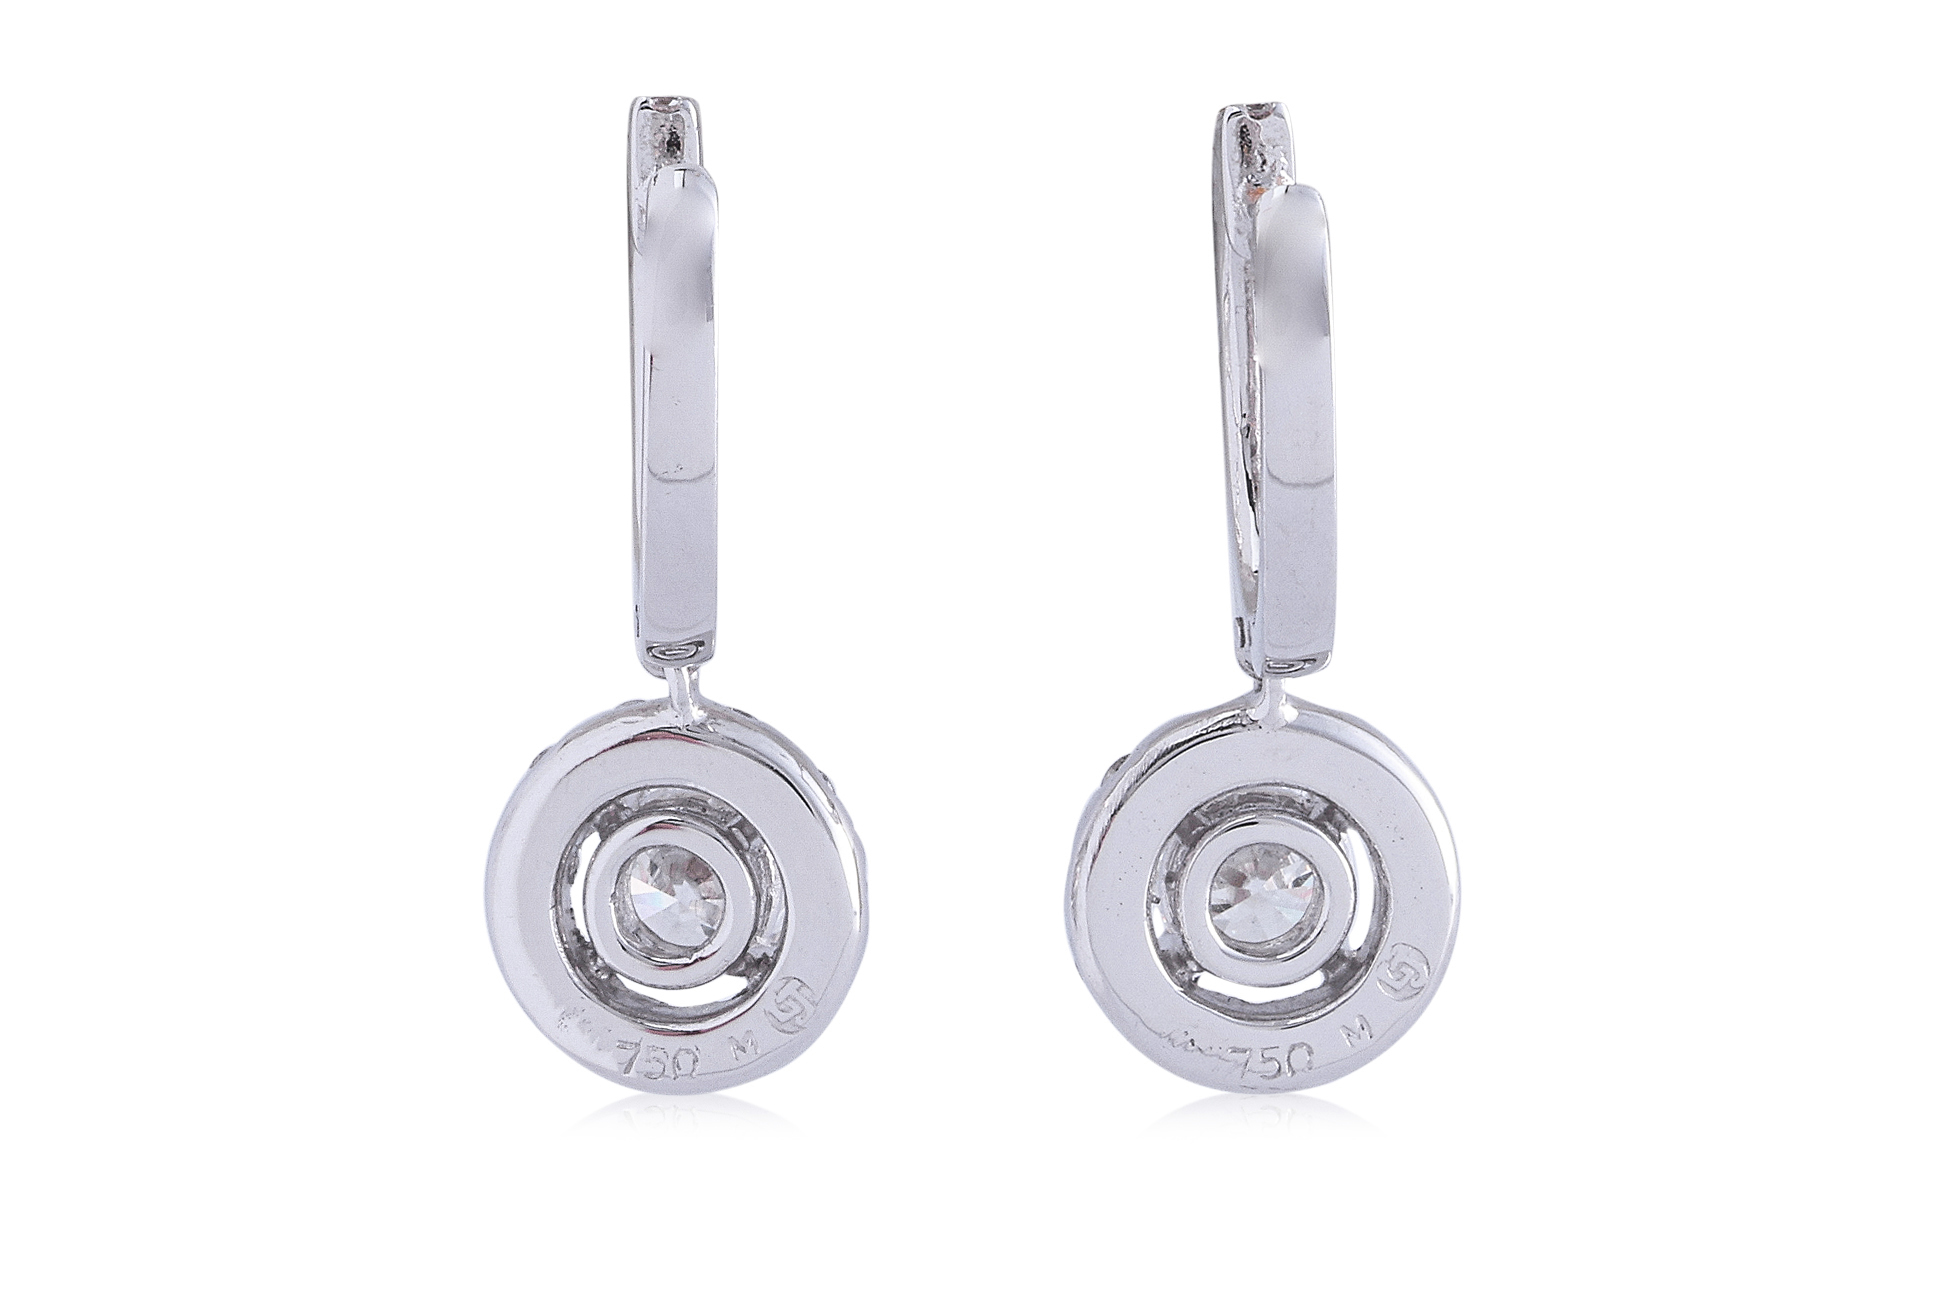 A PAIR OF DIAMOND 'HALO' EARRINGS BY LARRY JEWELLERY - Image 3 of 4